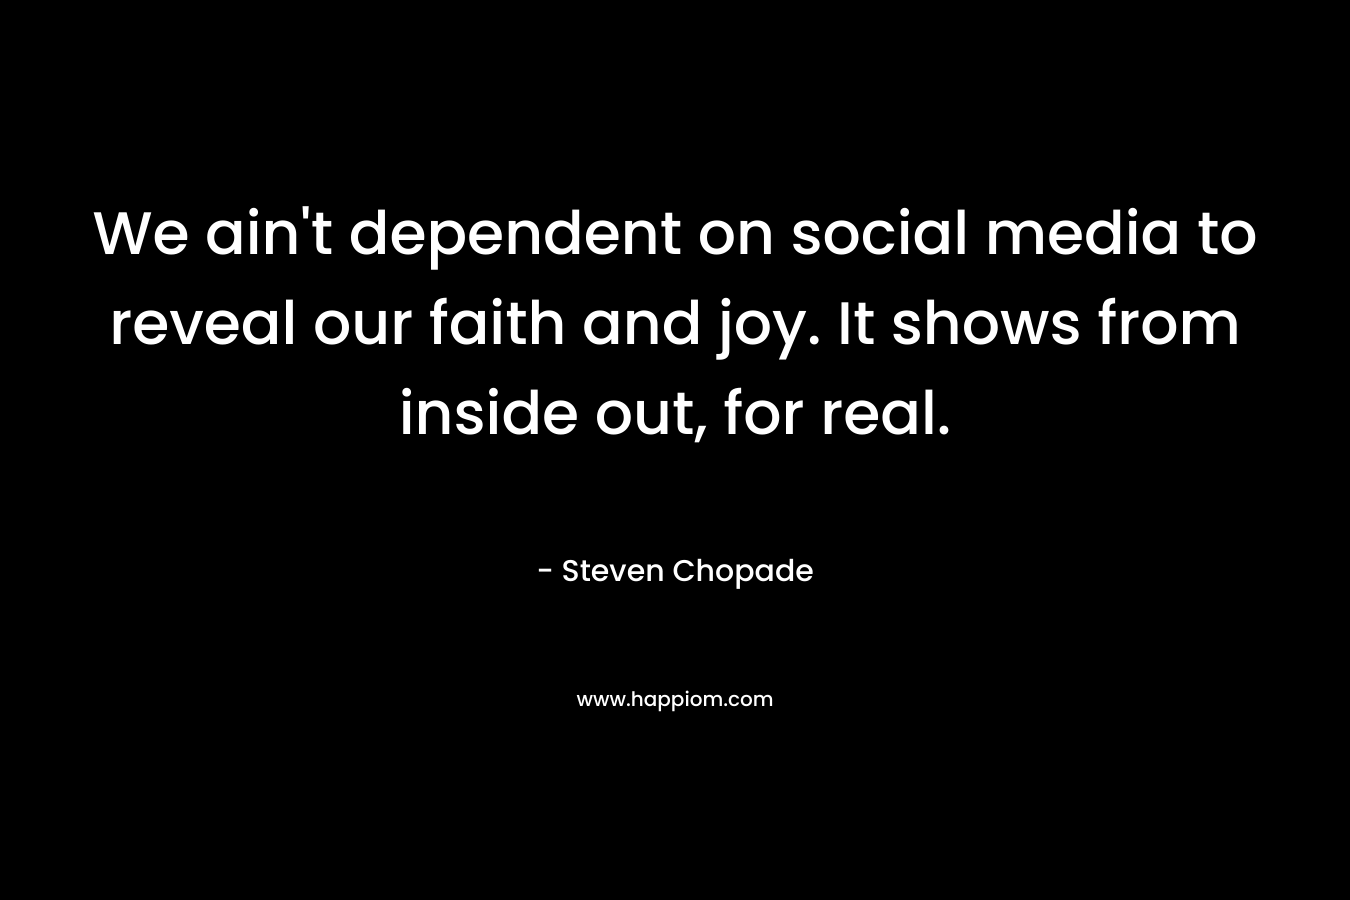 We ain’t dependent on social media to reveal our faith and joy. It shows from inside out, for real. – Steven Chopade